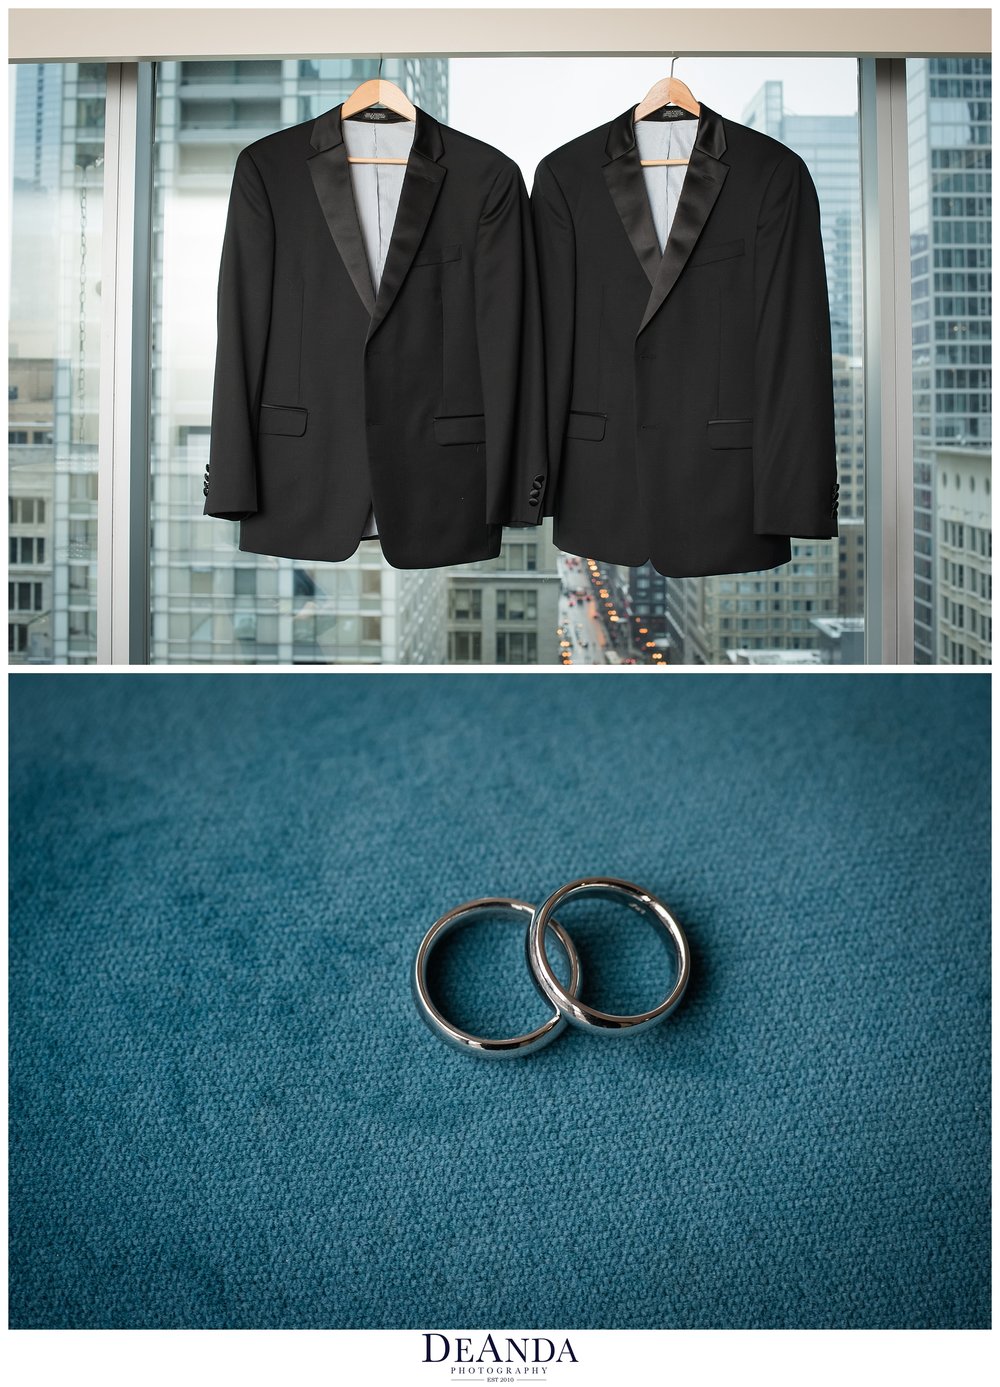 same sex wedding grooms details from the wit hotel chicago wedding gay wedding suits and rings